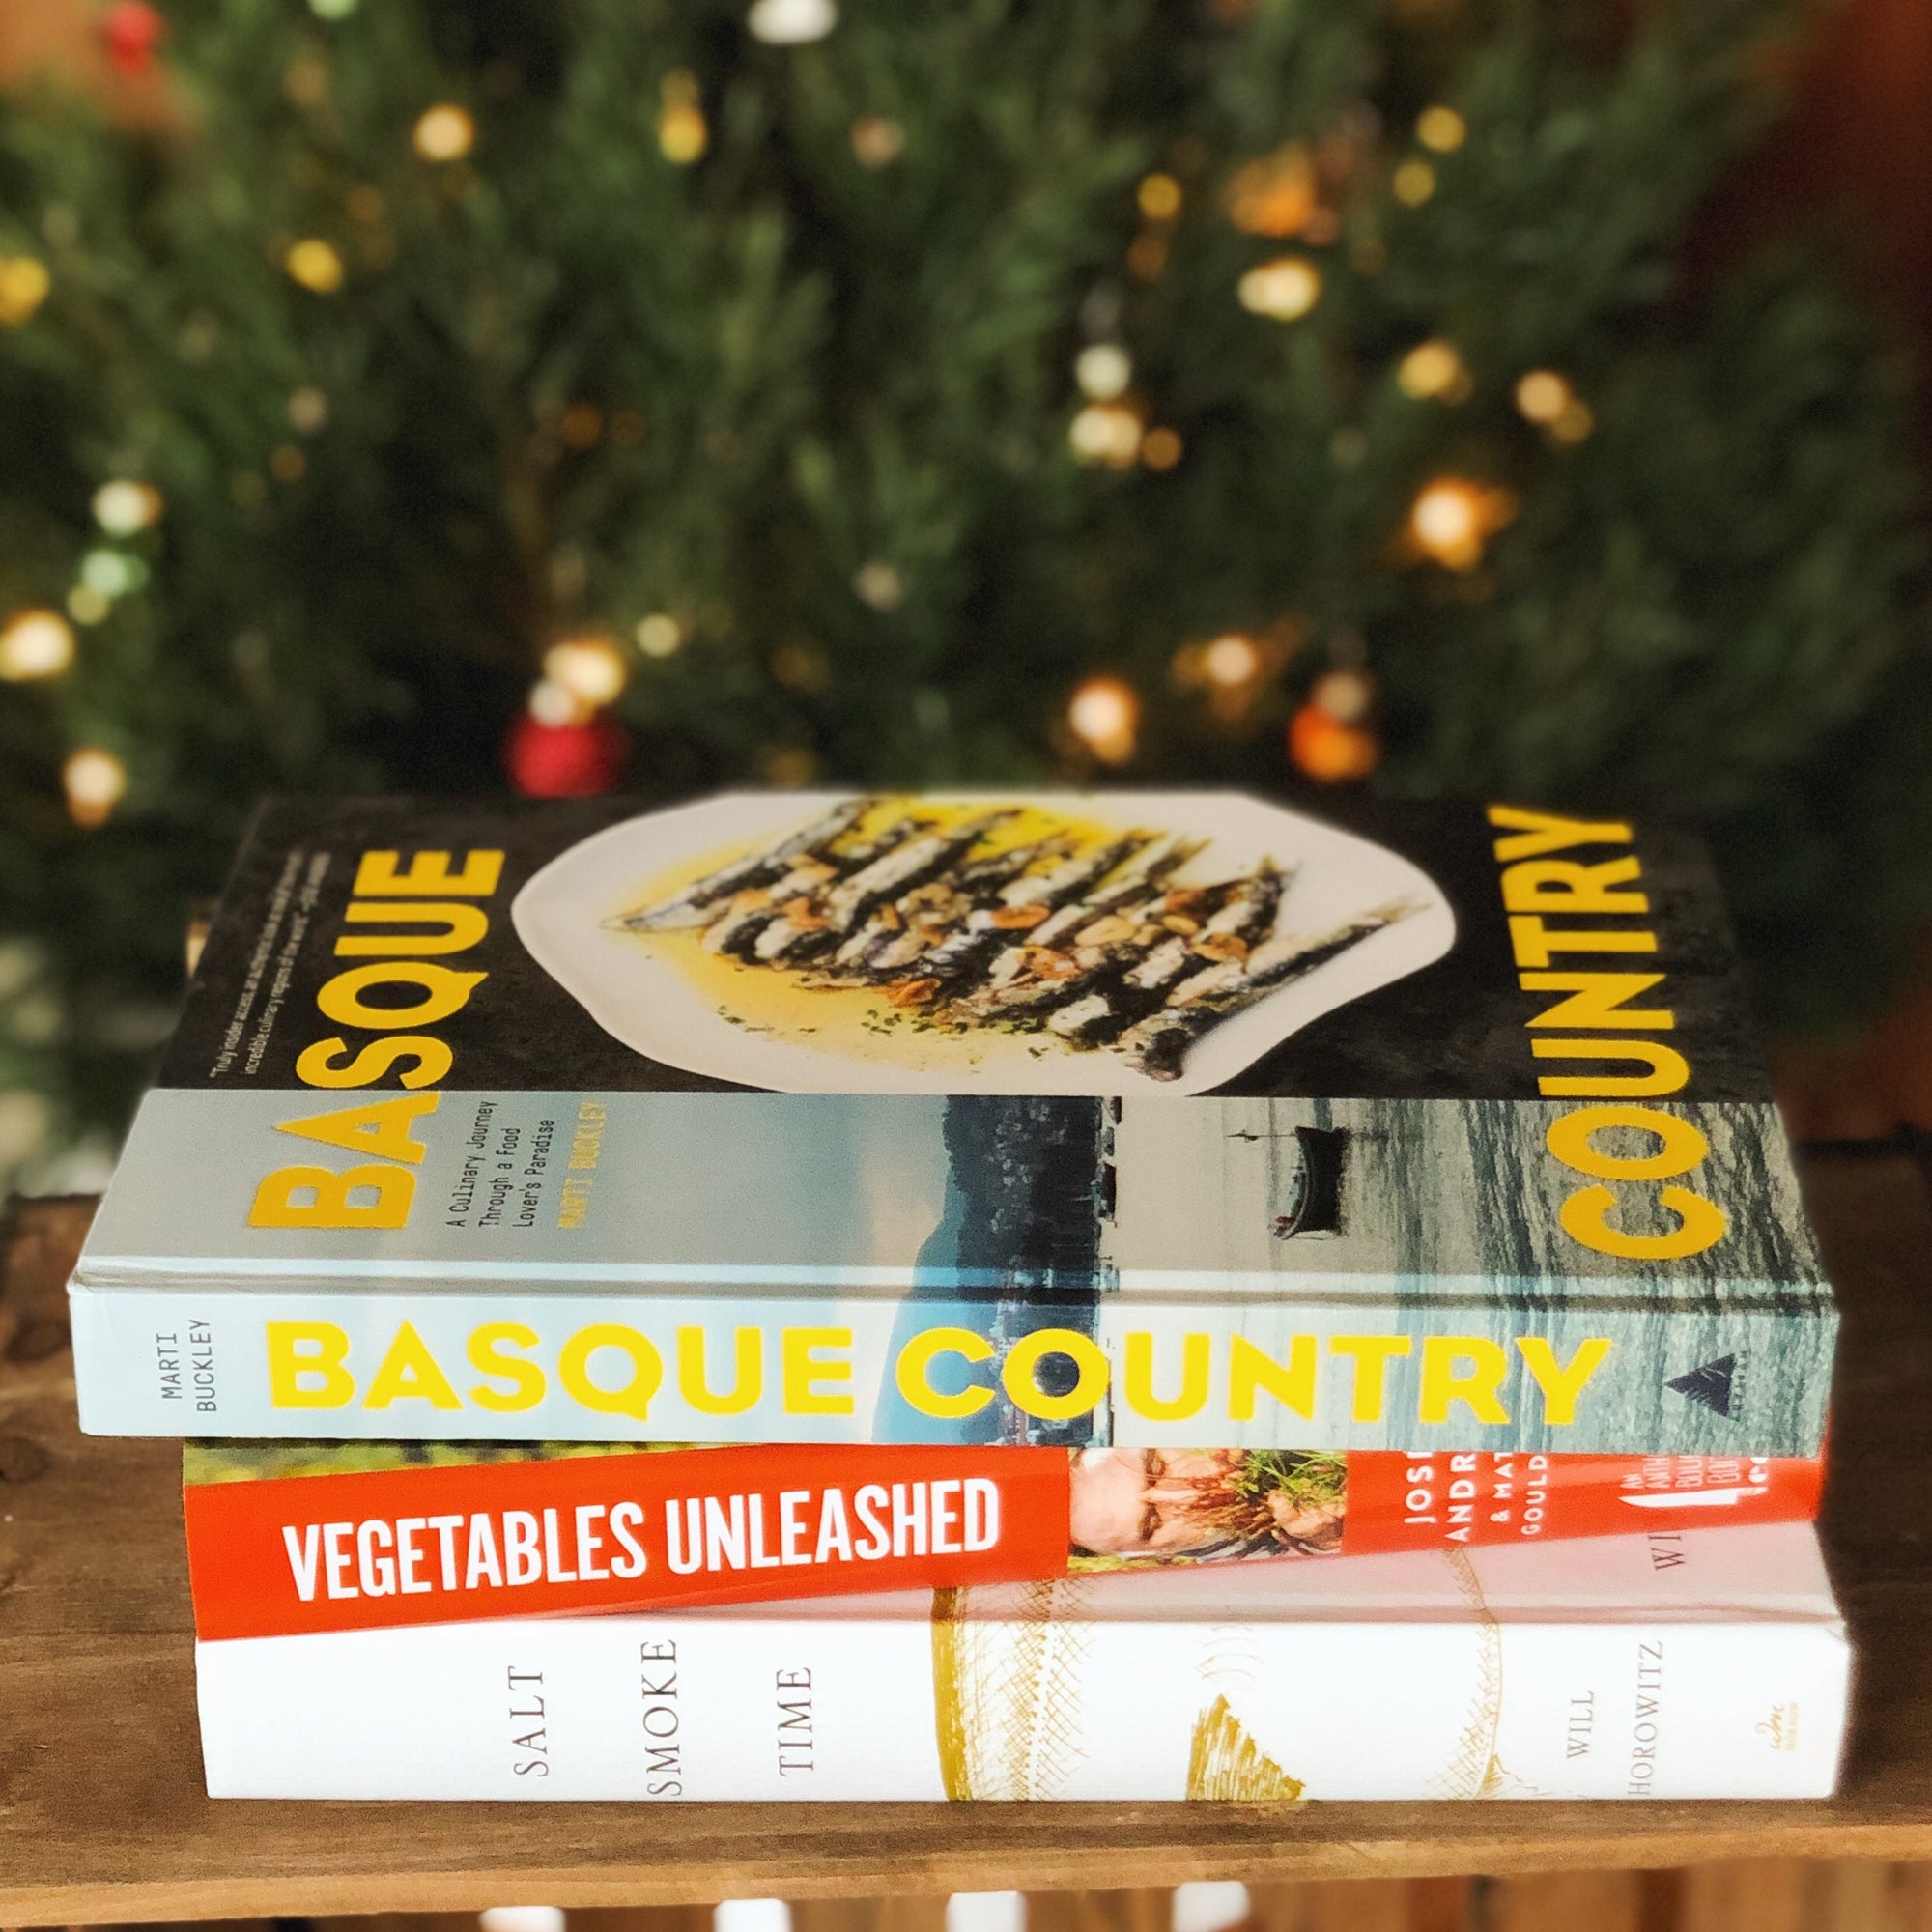 Three books for foodies this Christmas